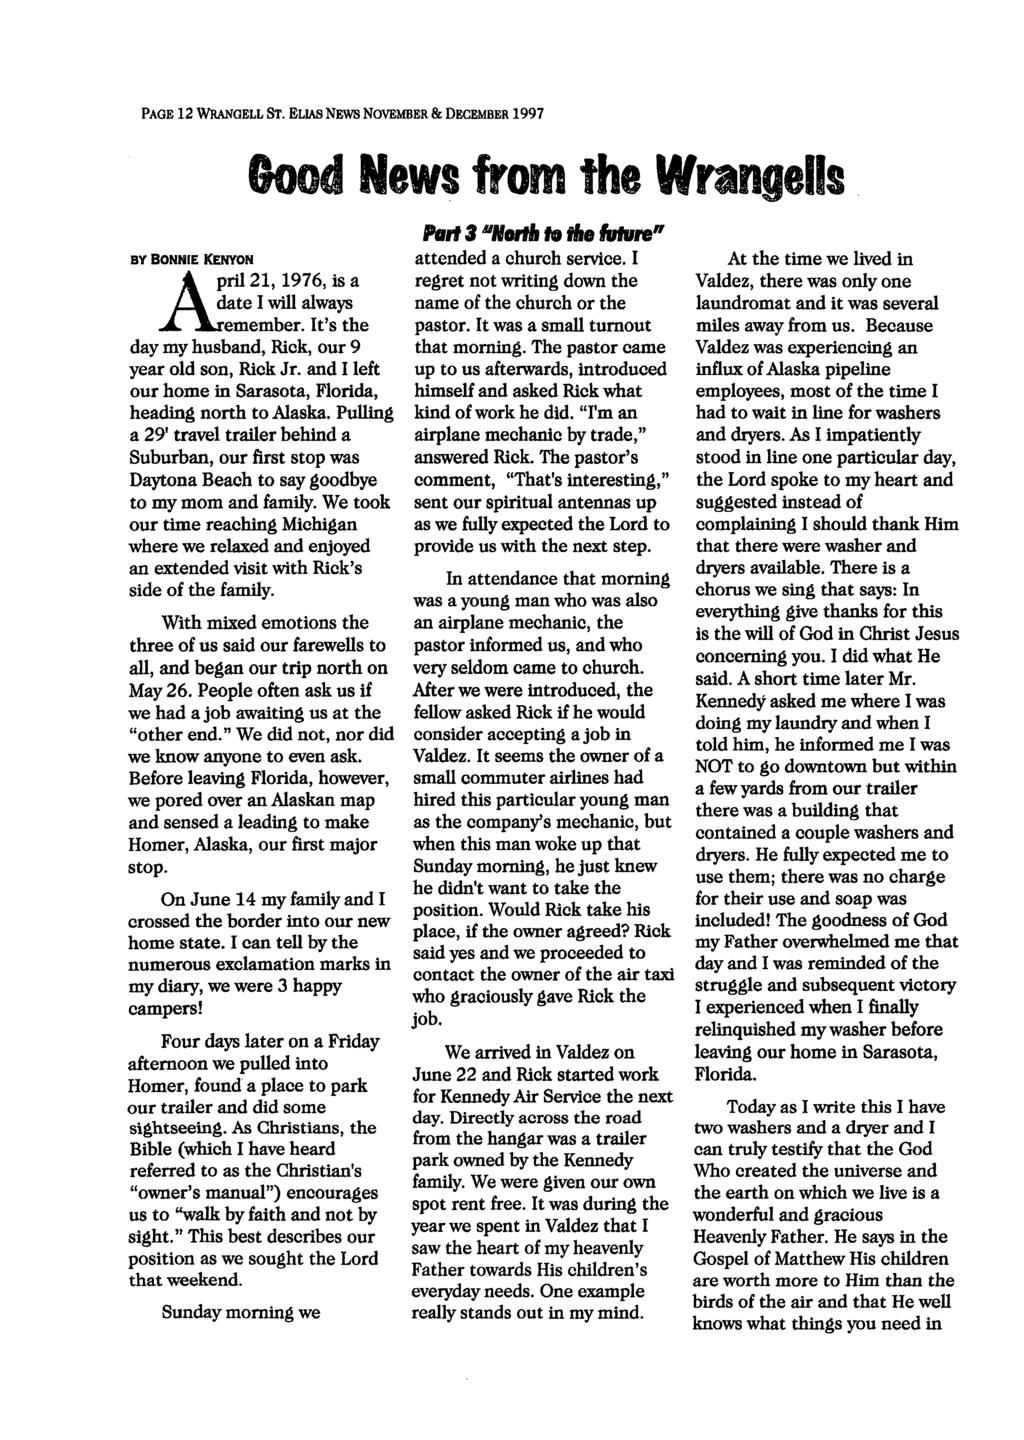 PAGE 12 WRANGELL ST. ELIAS NEWS NOVEMBER & DECEMBER 1997 8ood News from the Wrangells BY BONNIE KENYoN pril21, 1976, is a date I will always emember.